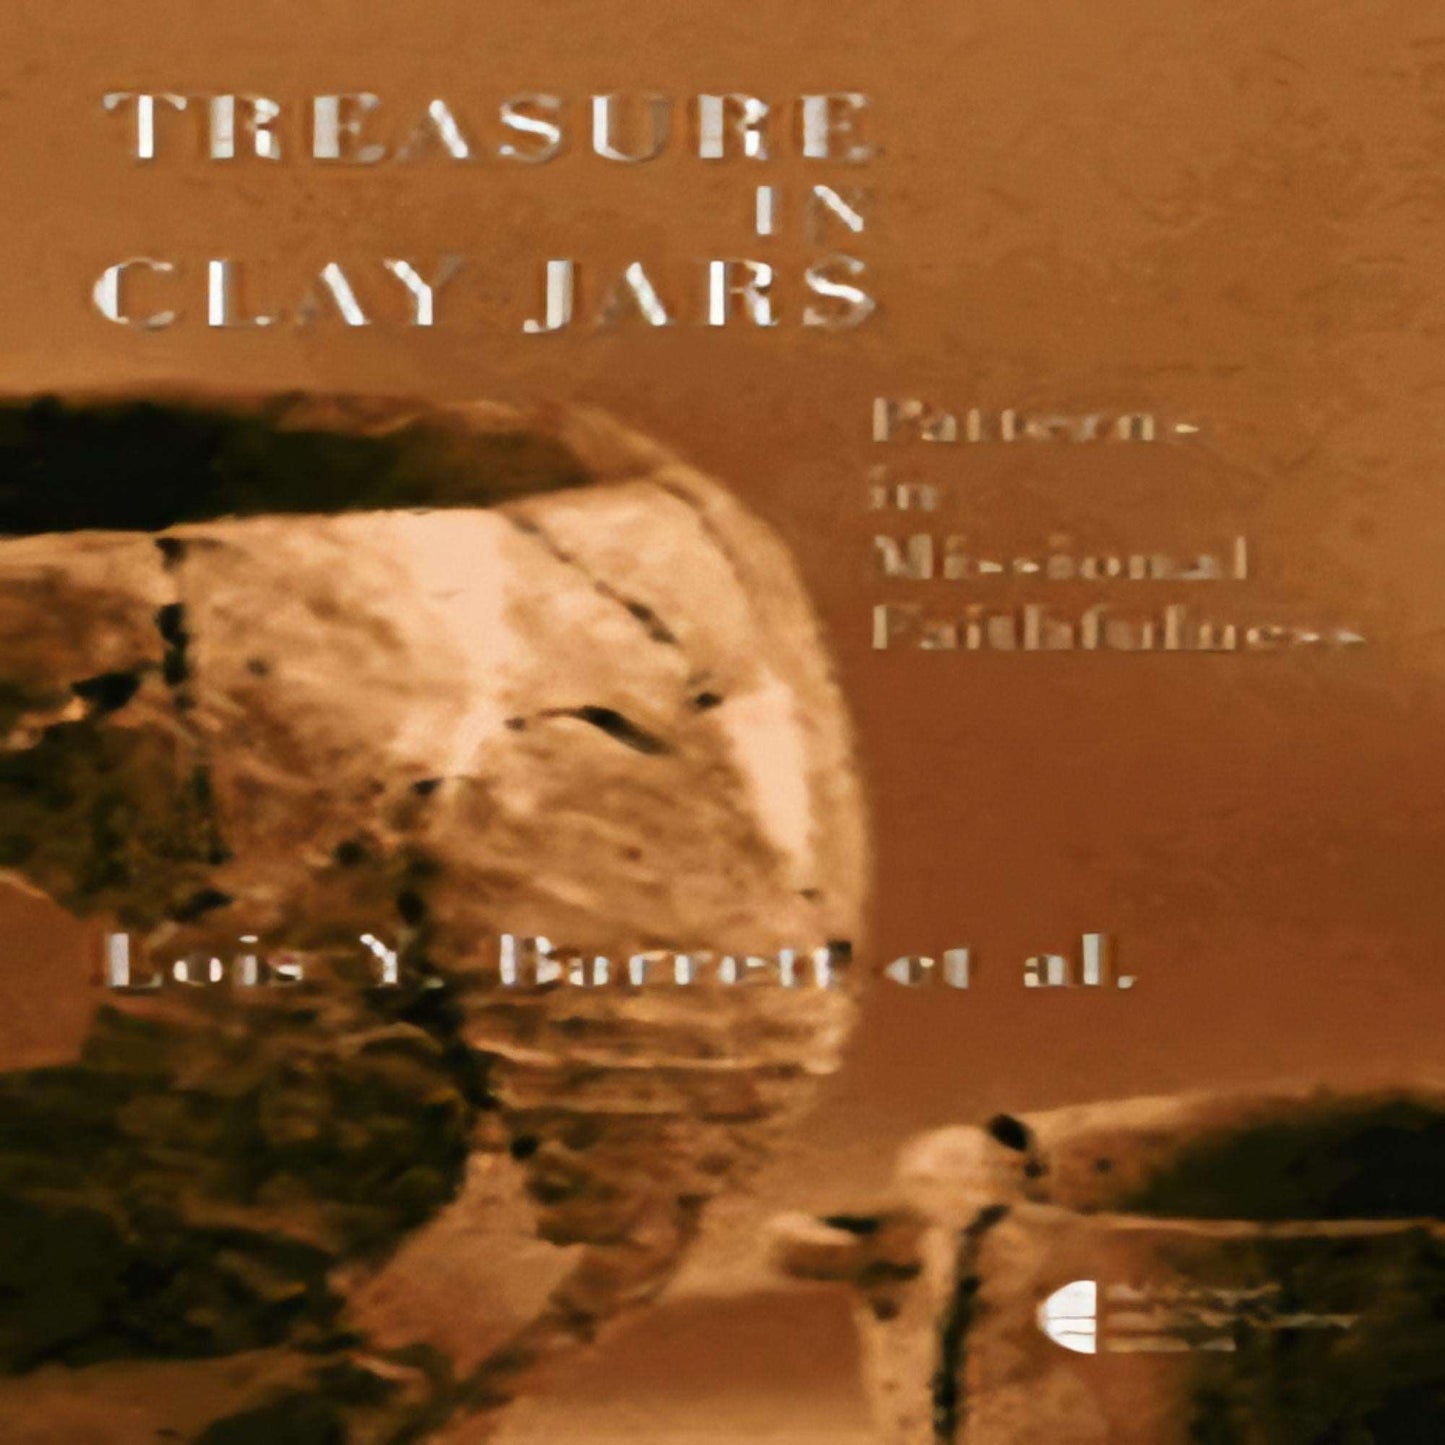 Treasure in Clay Jars: Patterns in Missional Faithfulness (Gospel and Our Culture Series (Gocs))74-021423-080282692XDPGBOOKSTORE.COM. Today's Bestsellers.